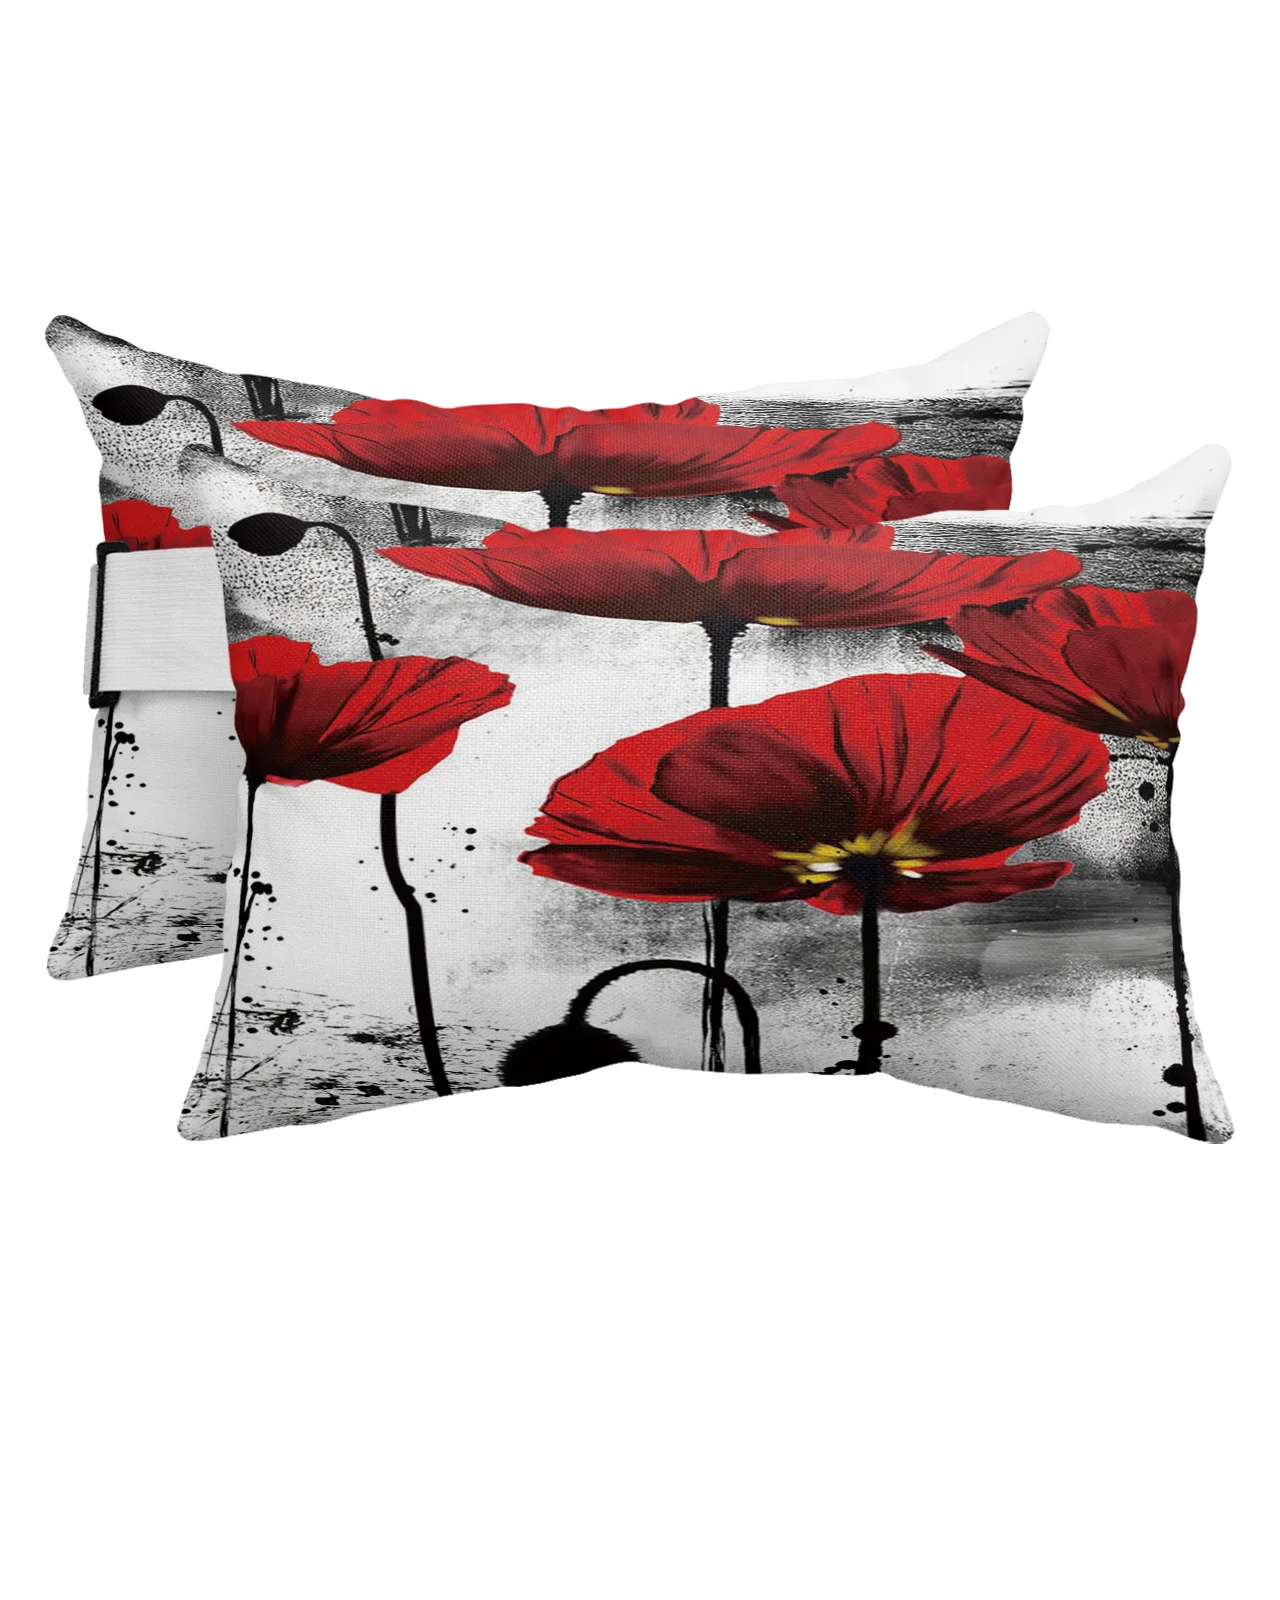 

Ink Painting Poppy Red Flower Waterproof Pillow With Insert Adjustable Elastic Lounge Chair Recliner Head Lumbar Travel Pillow